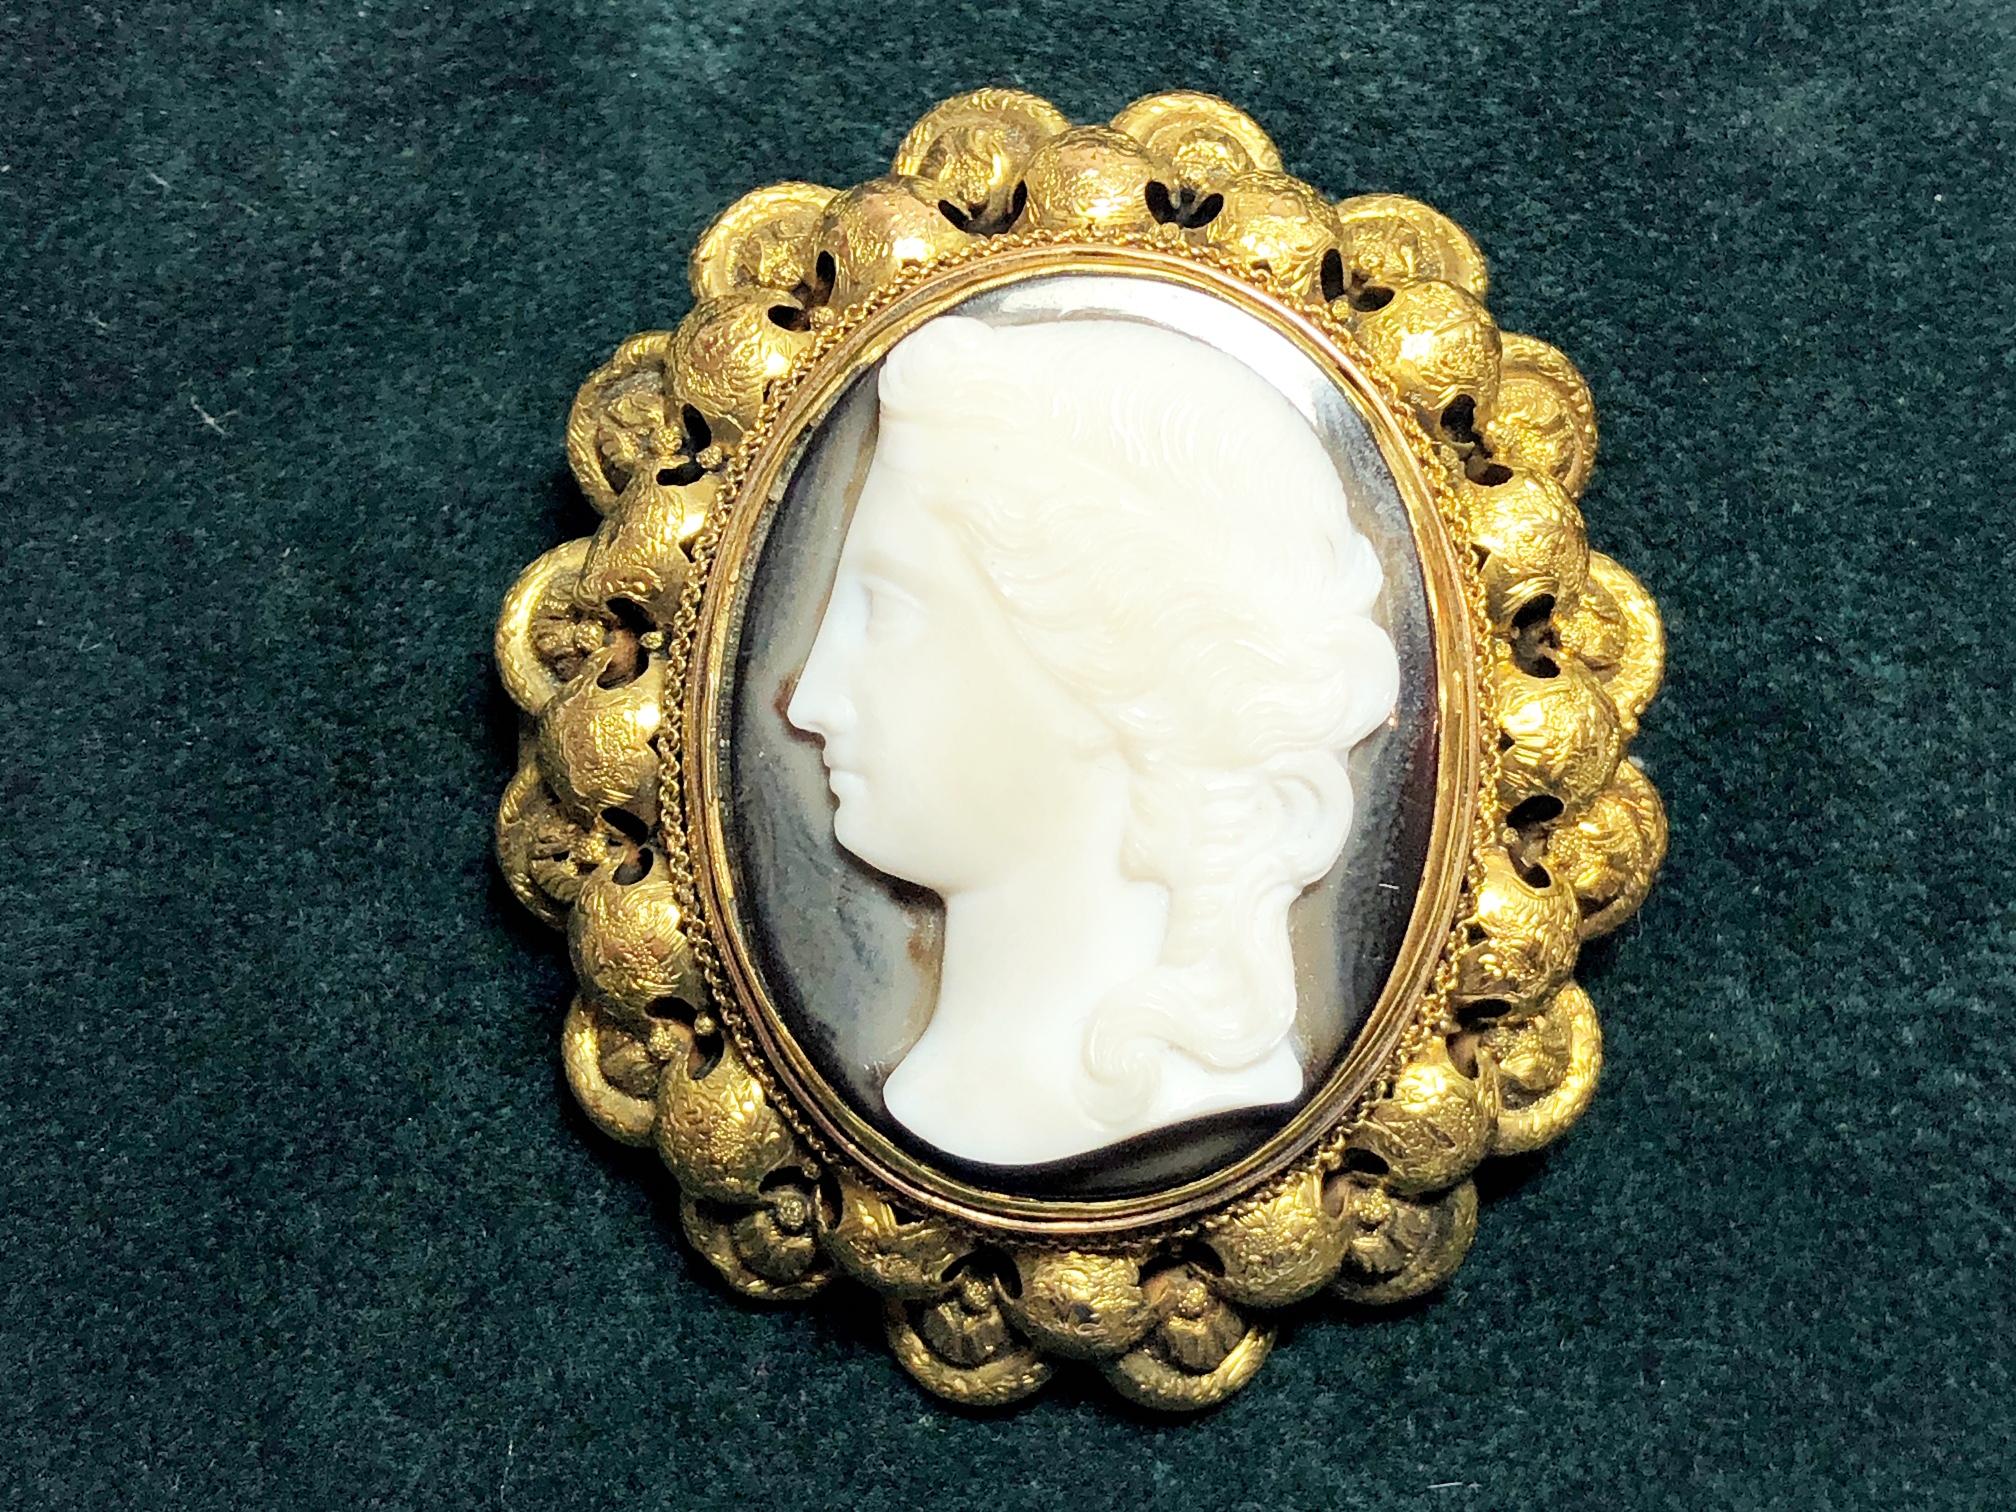 Antique Hardstone Cameo And Gold Brooch, Circa 1875 In Good Condition For Sale In London, GB